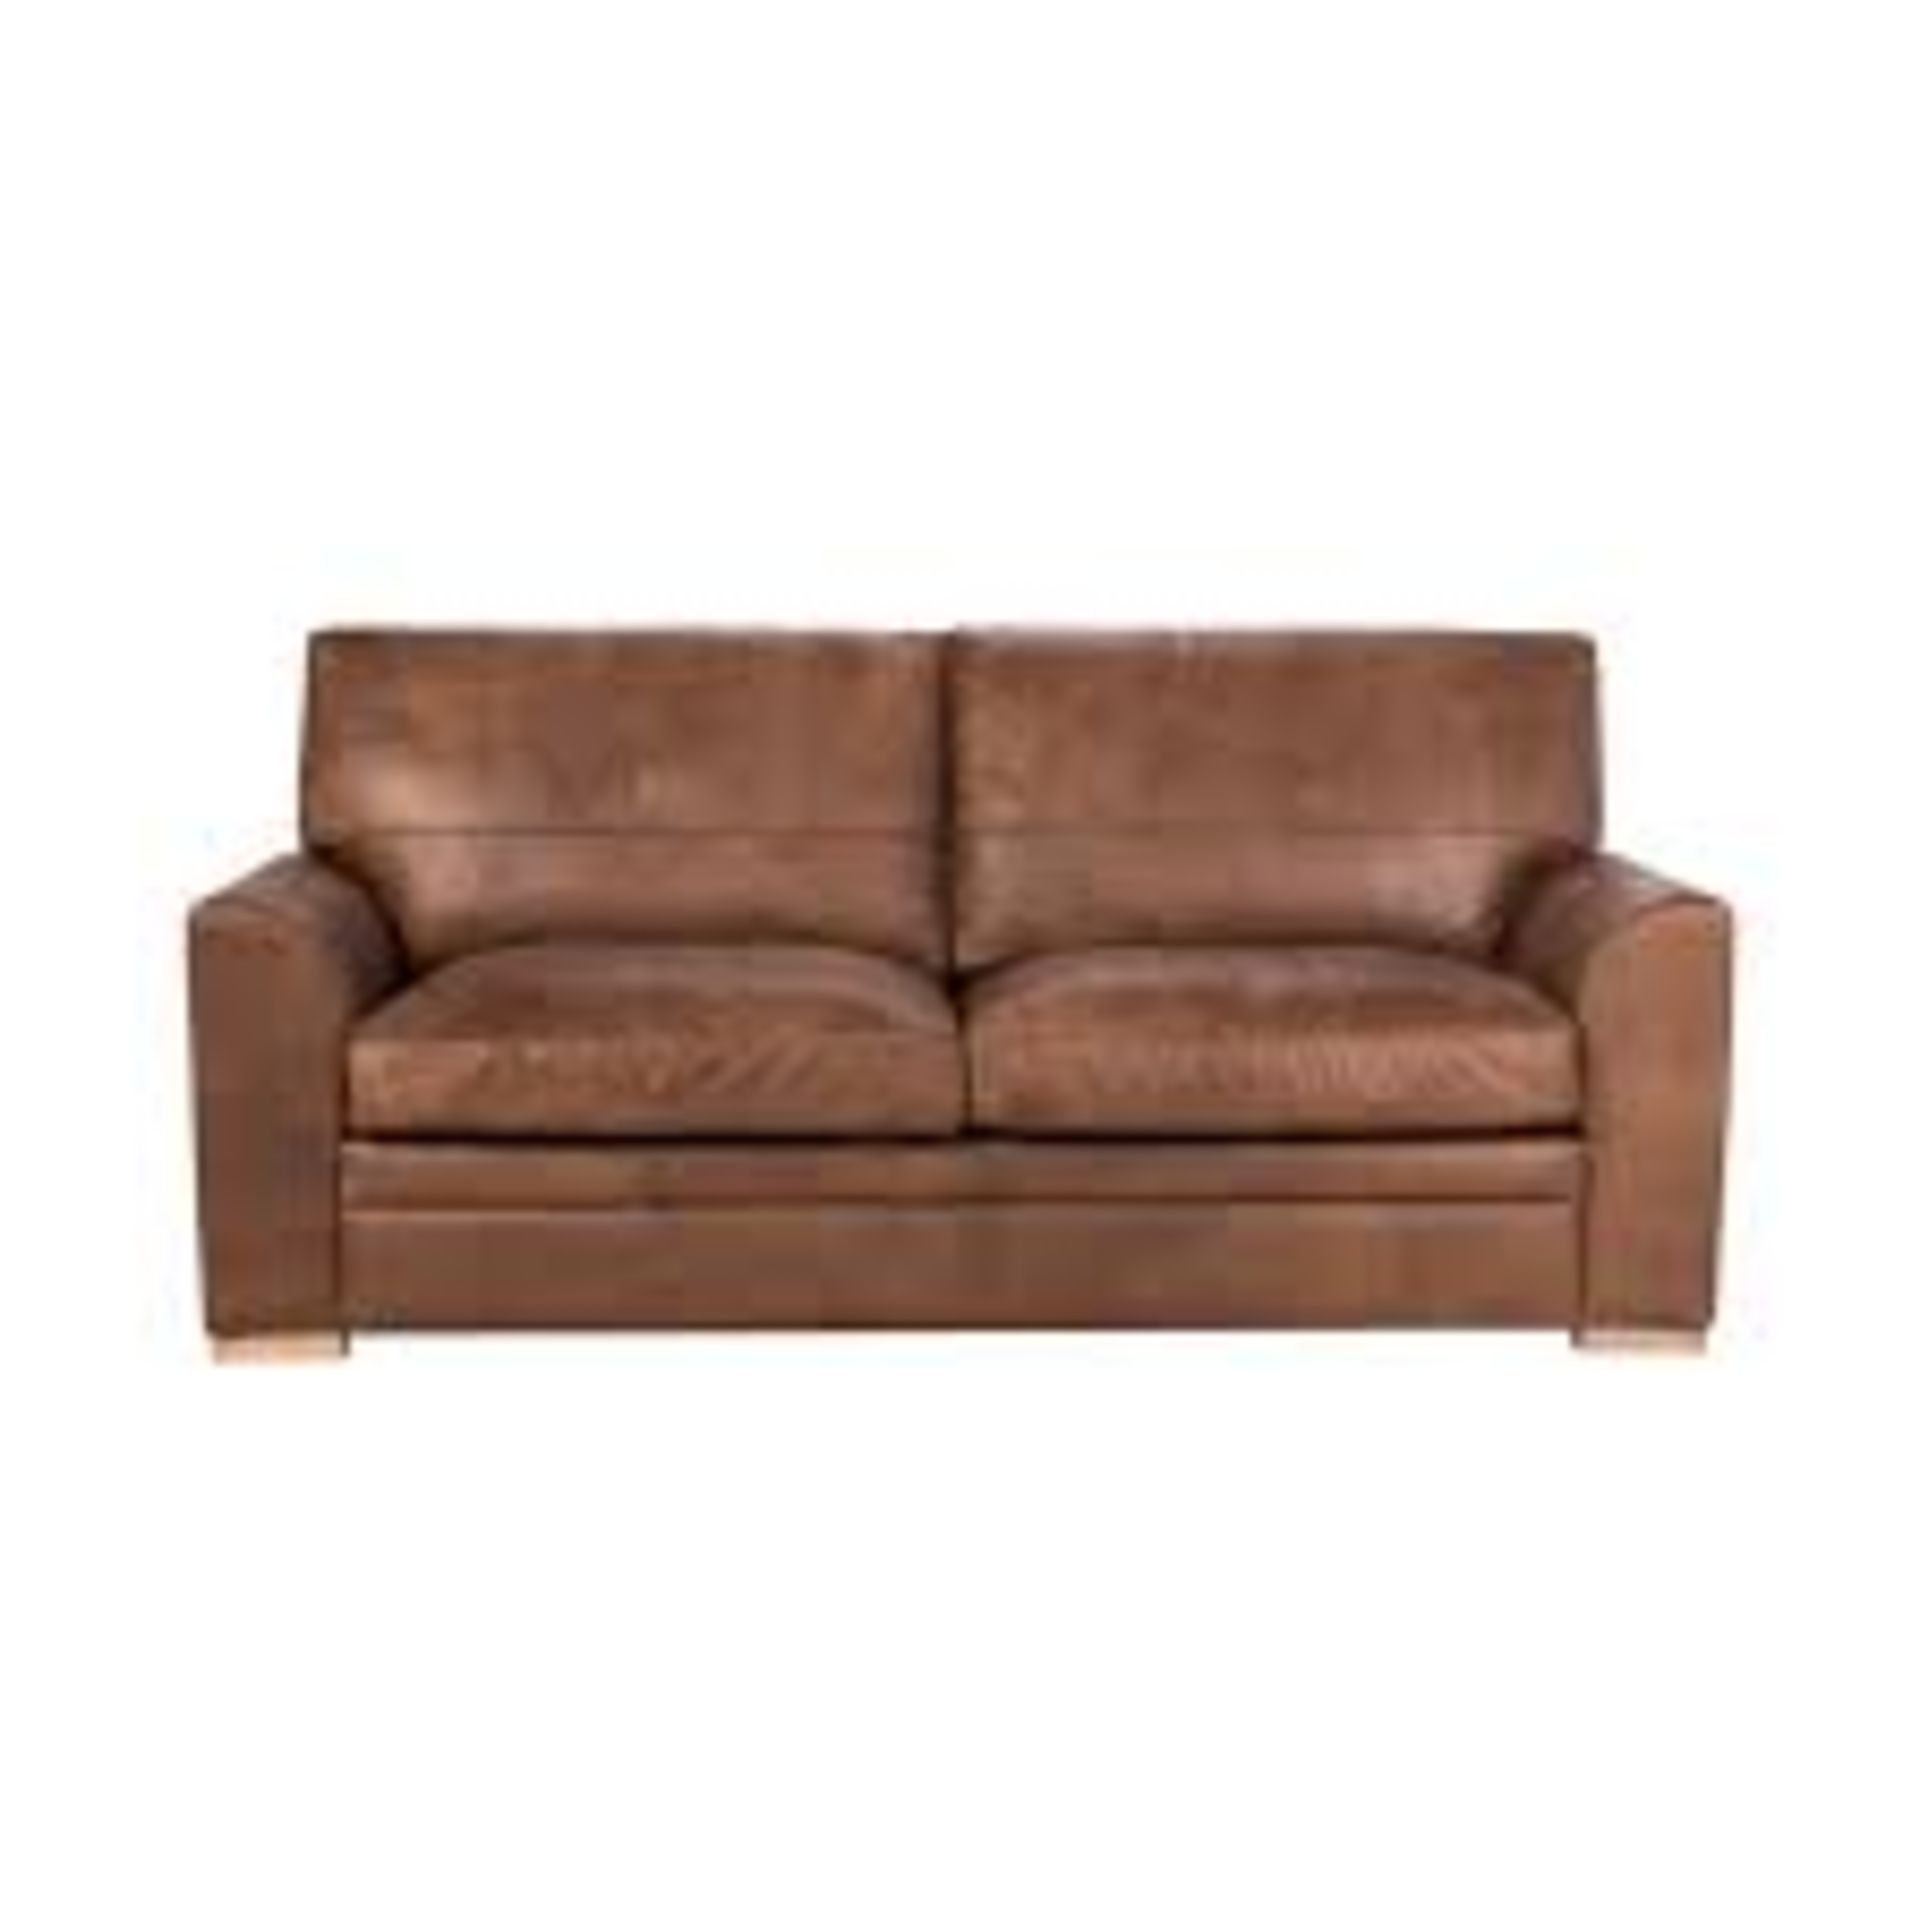 Mayfair Sofa 3 Seater Churo Chocolate Leather A Modern Classic, With A More Relaxed And Casual